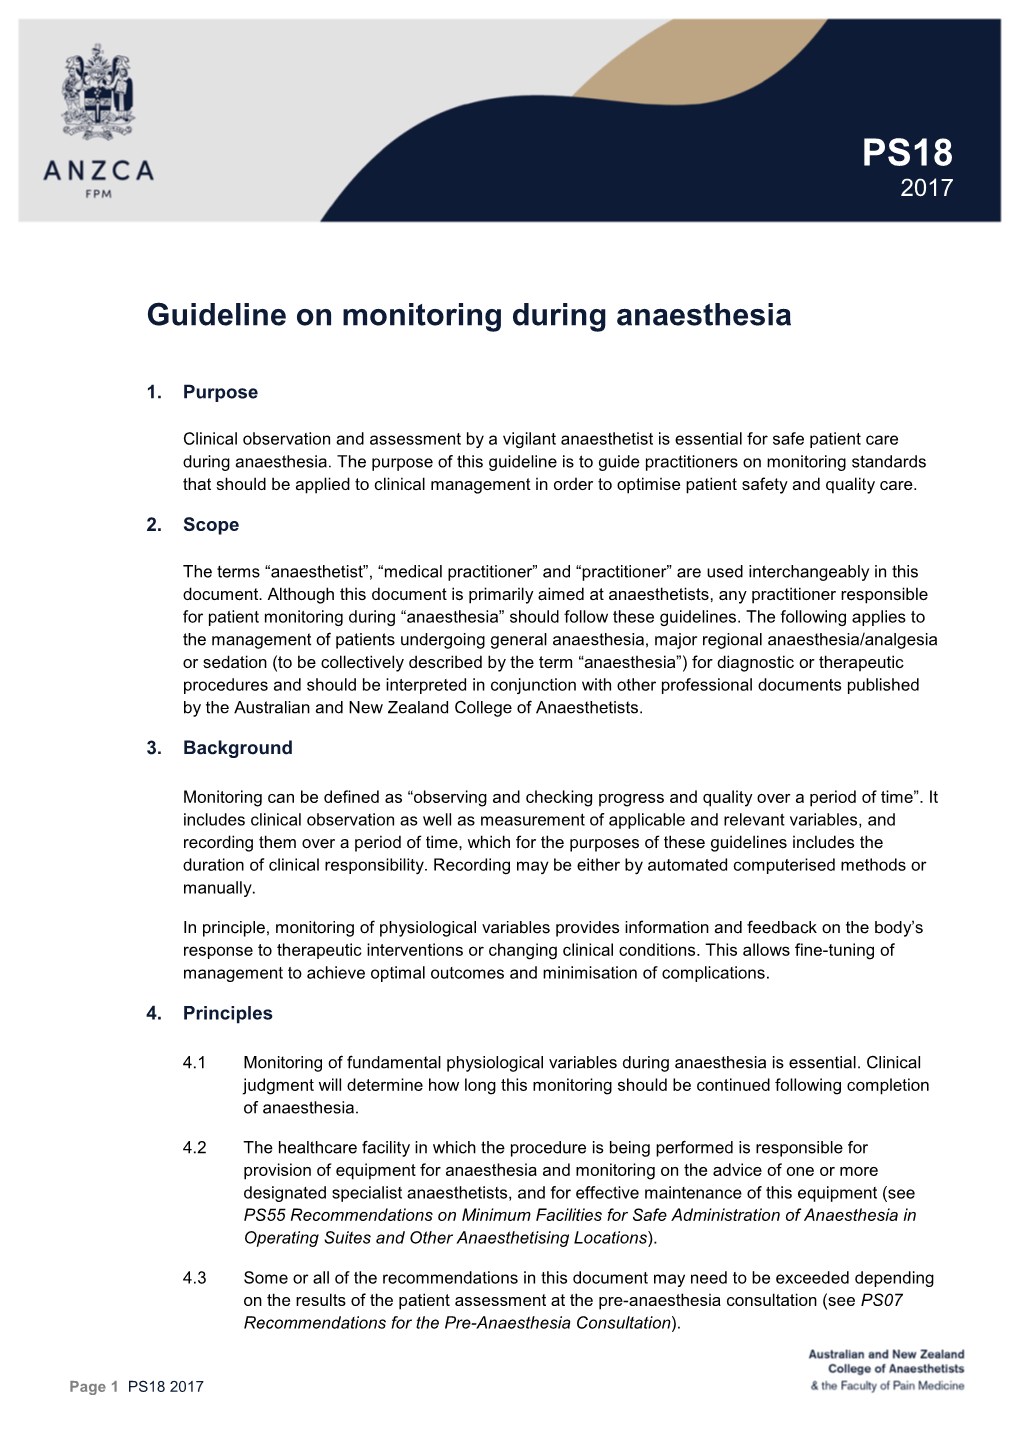 PS18 Guidelines on Monitoring During Anaesthesia